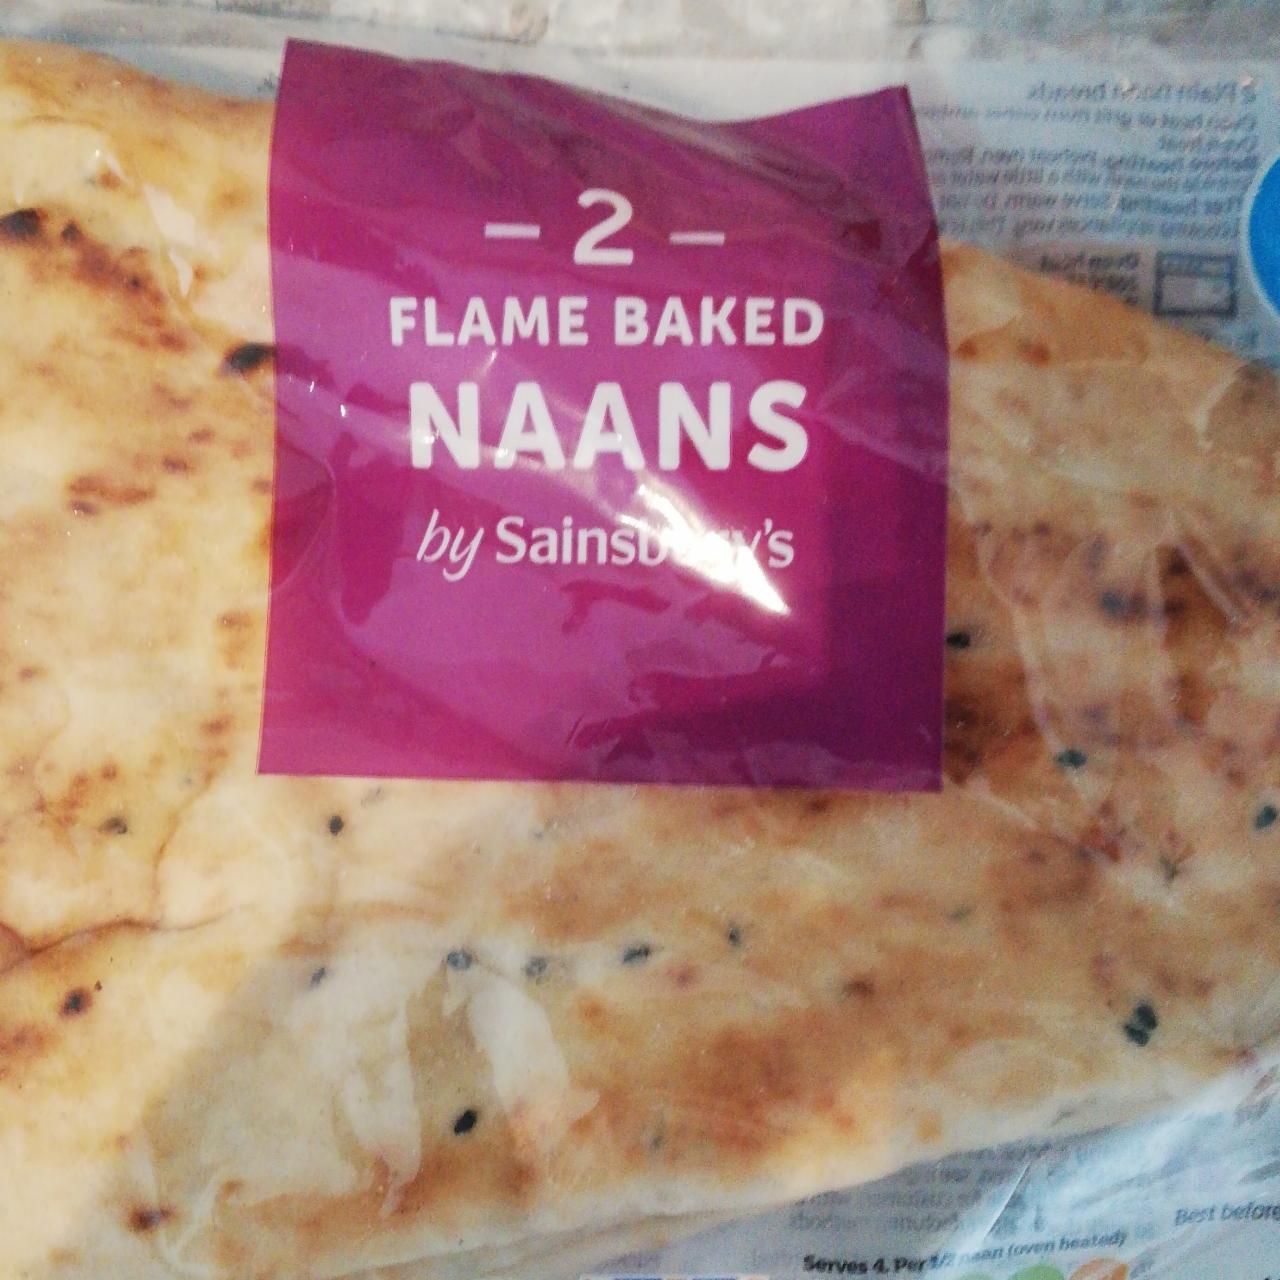 Fotografie - Flame baked naans by Sainsbury's